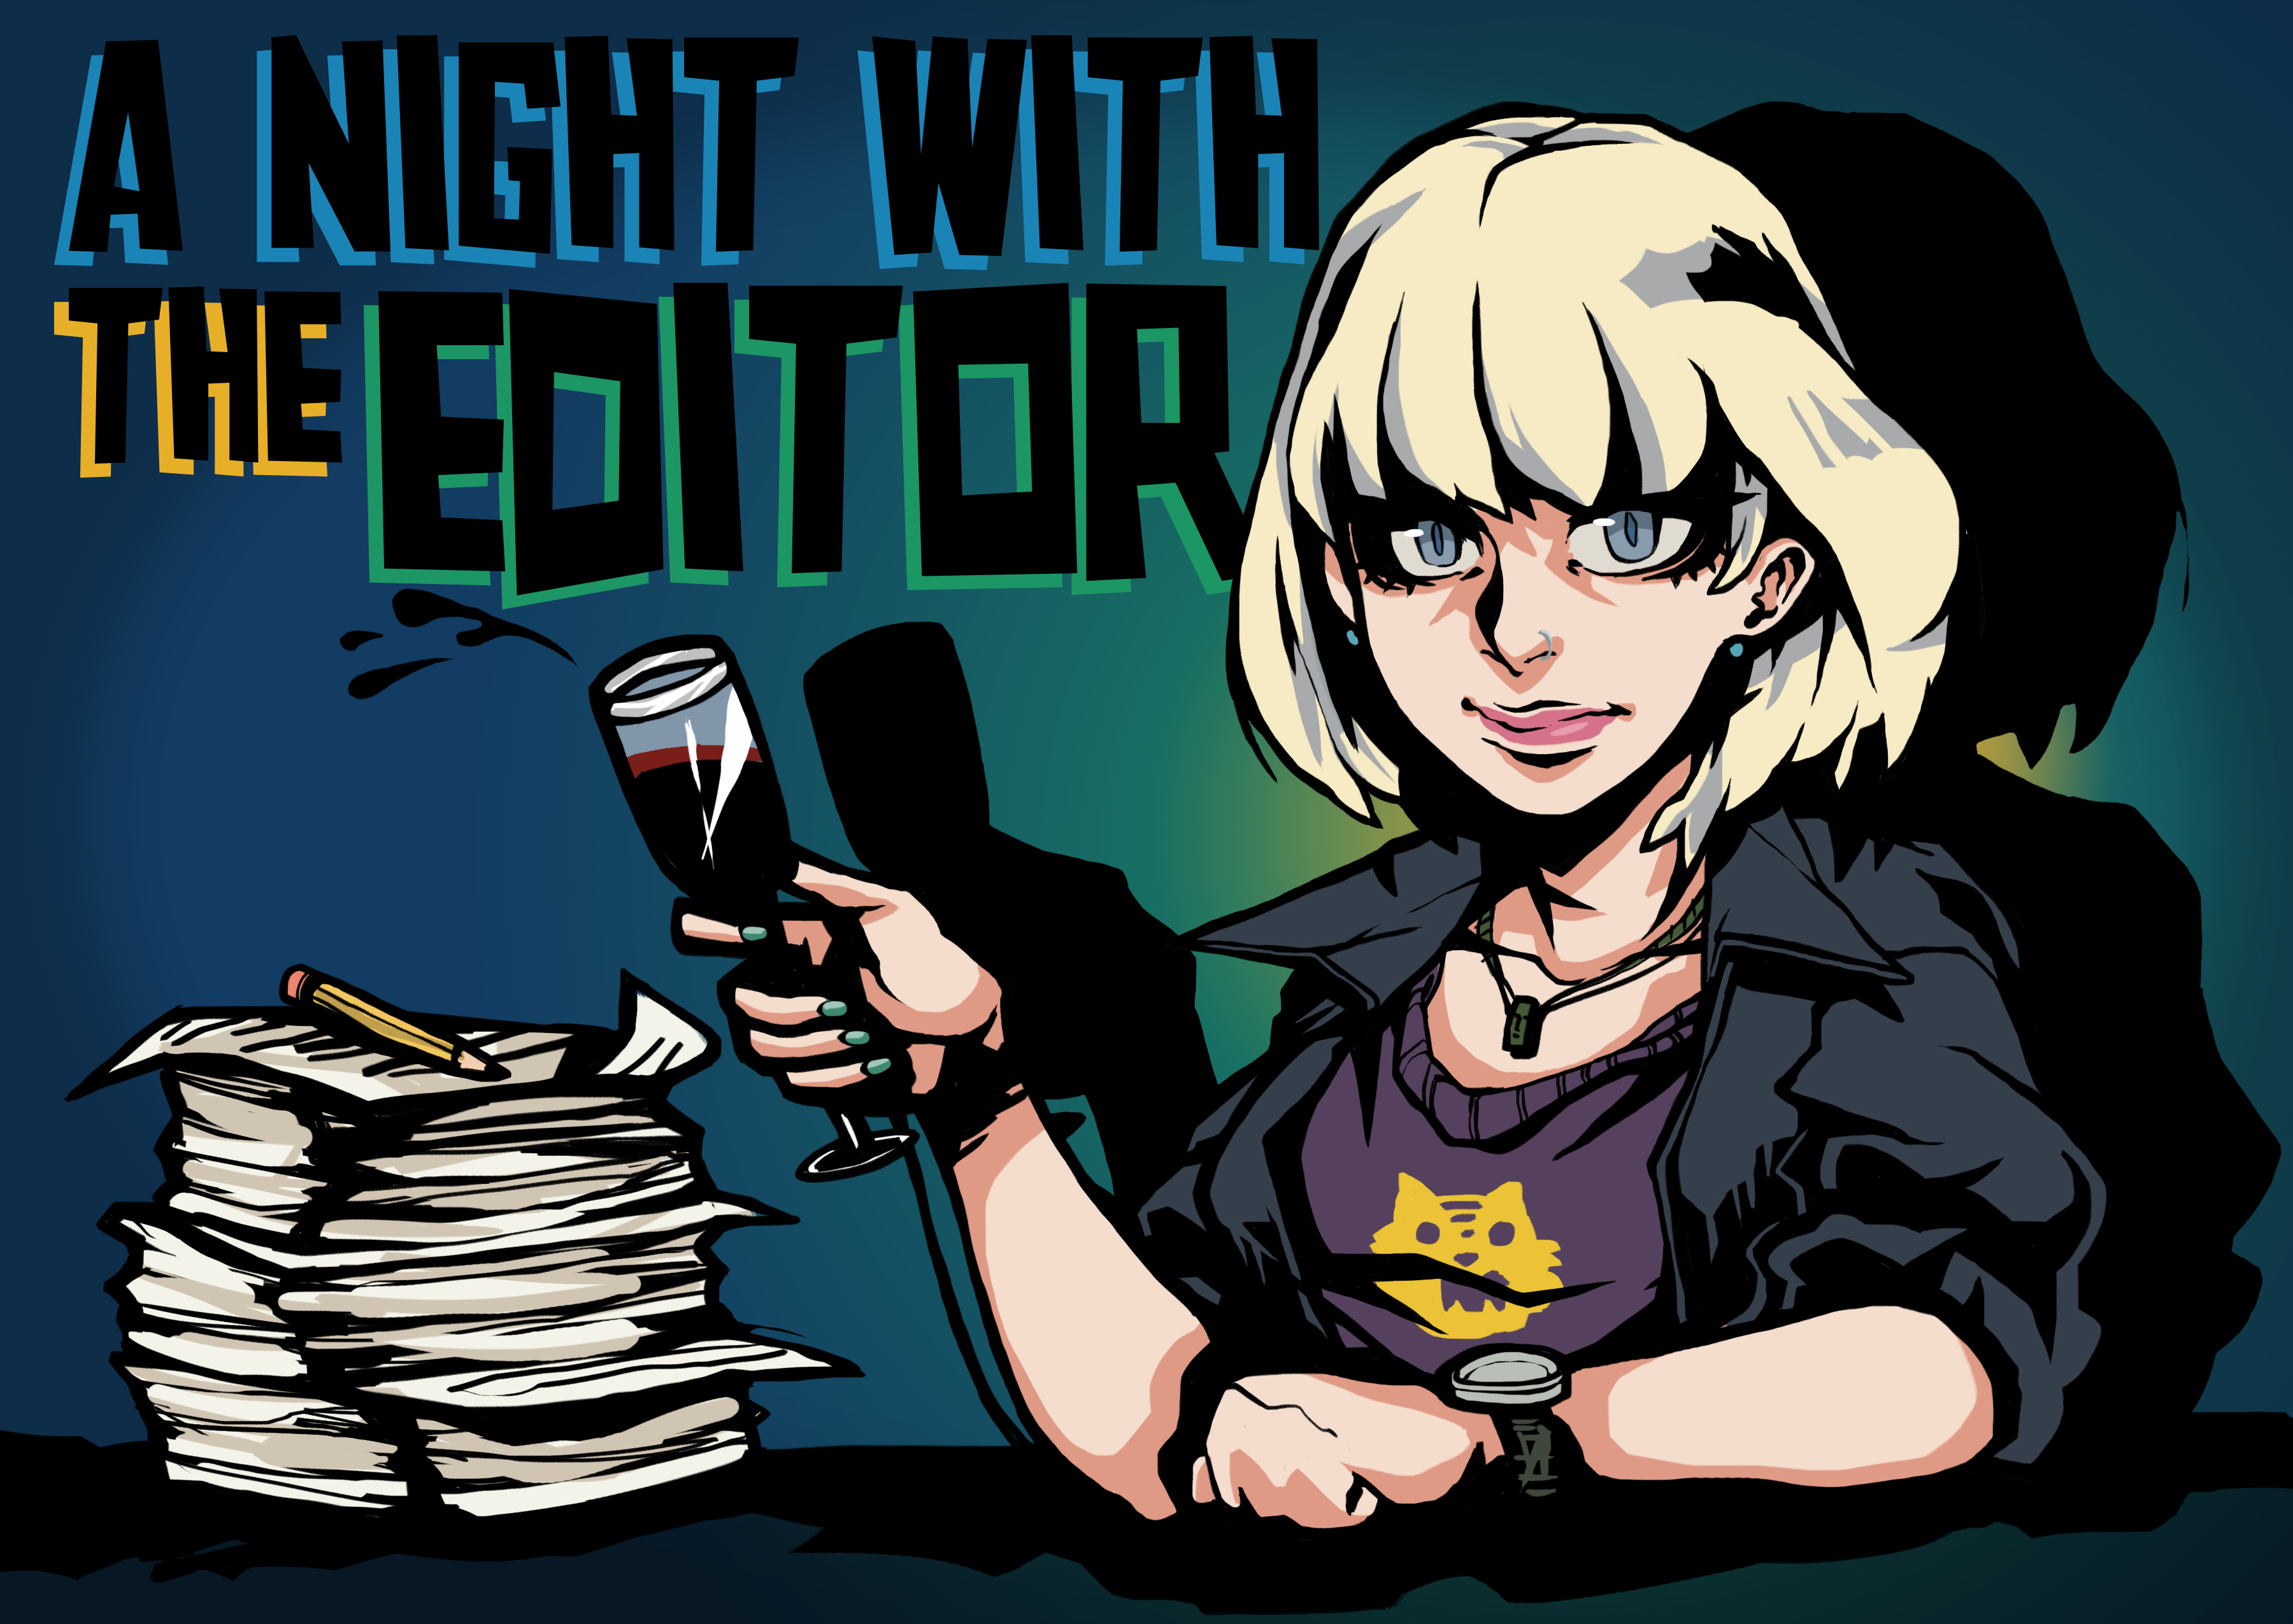 Graphic: A night with the editor blog series. Graphic created by The Signal Managing Editor Dave Silverio.